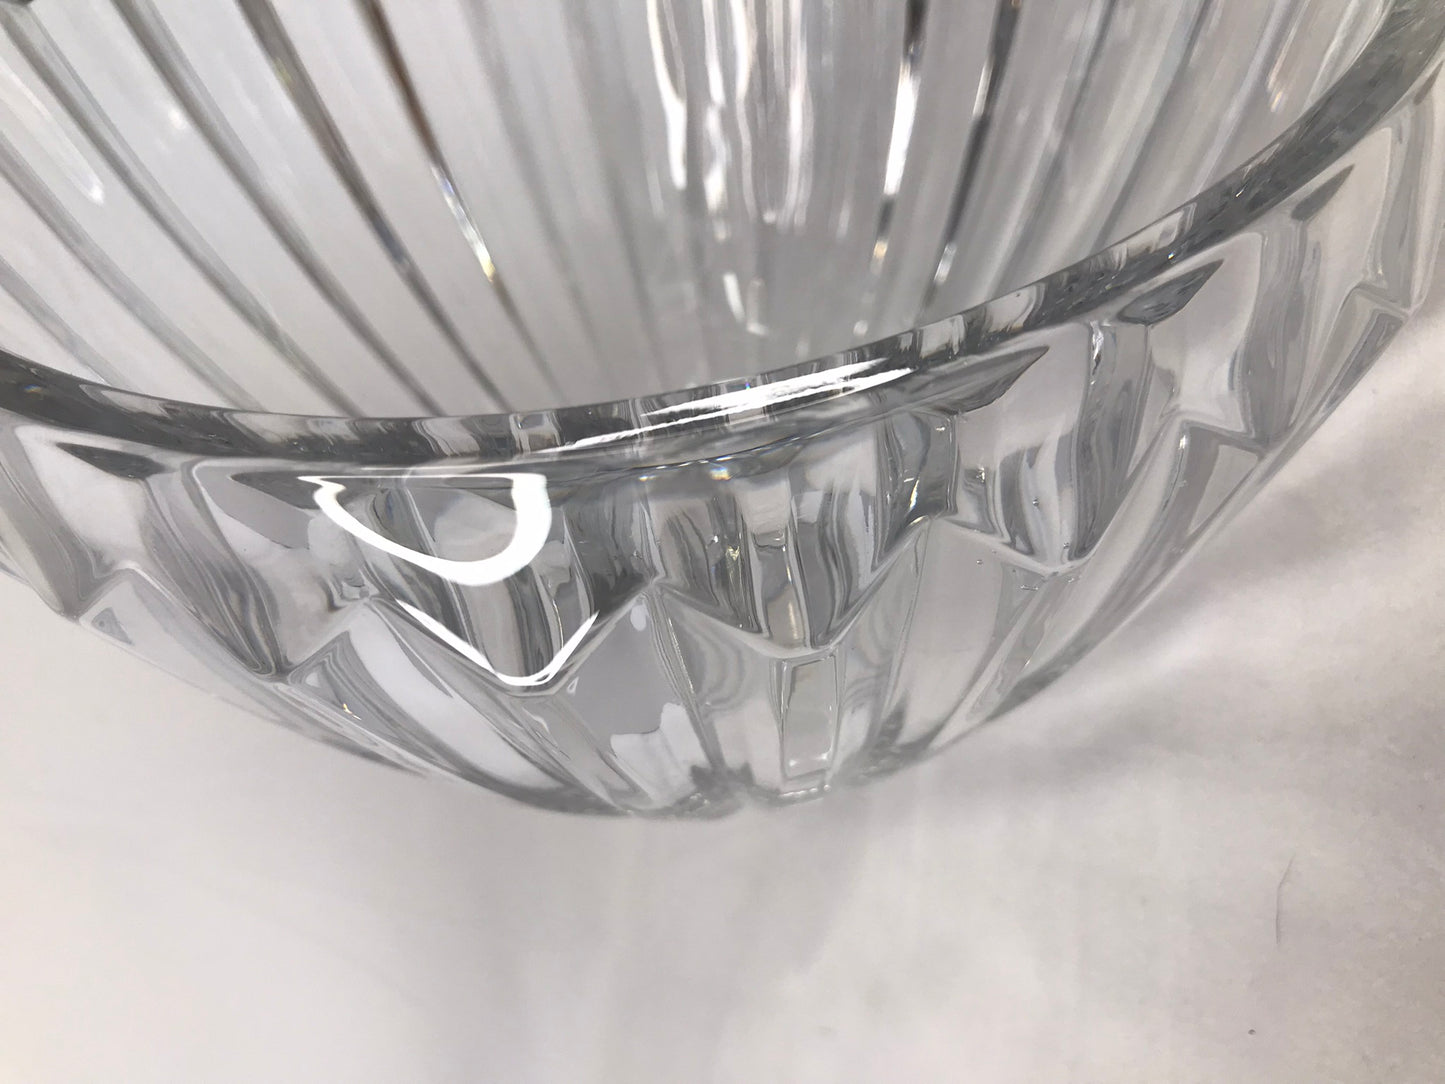 Home and Cottage Large Cut Glass Crystal Bowl Thick and Heavy 9 x 8 inch NEW Perfect